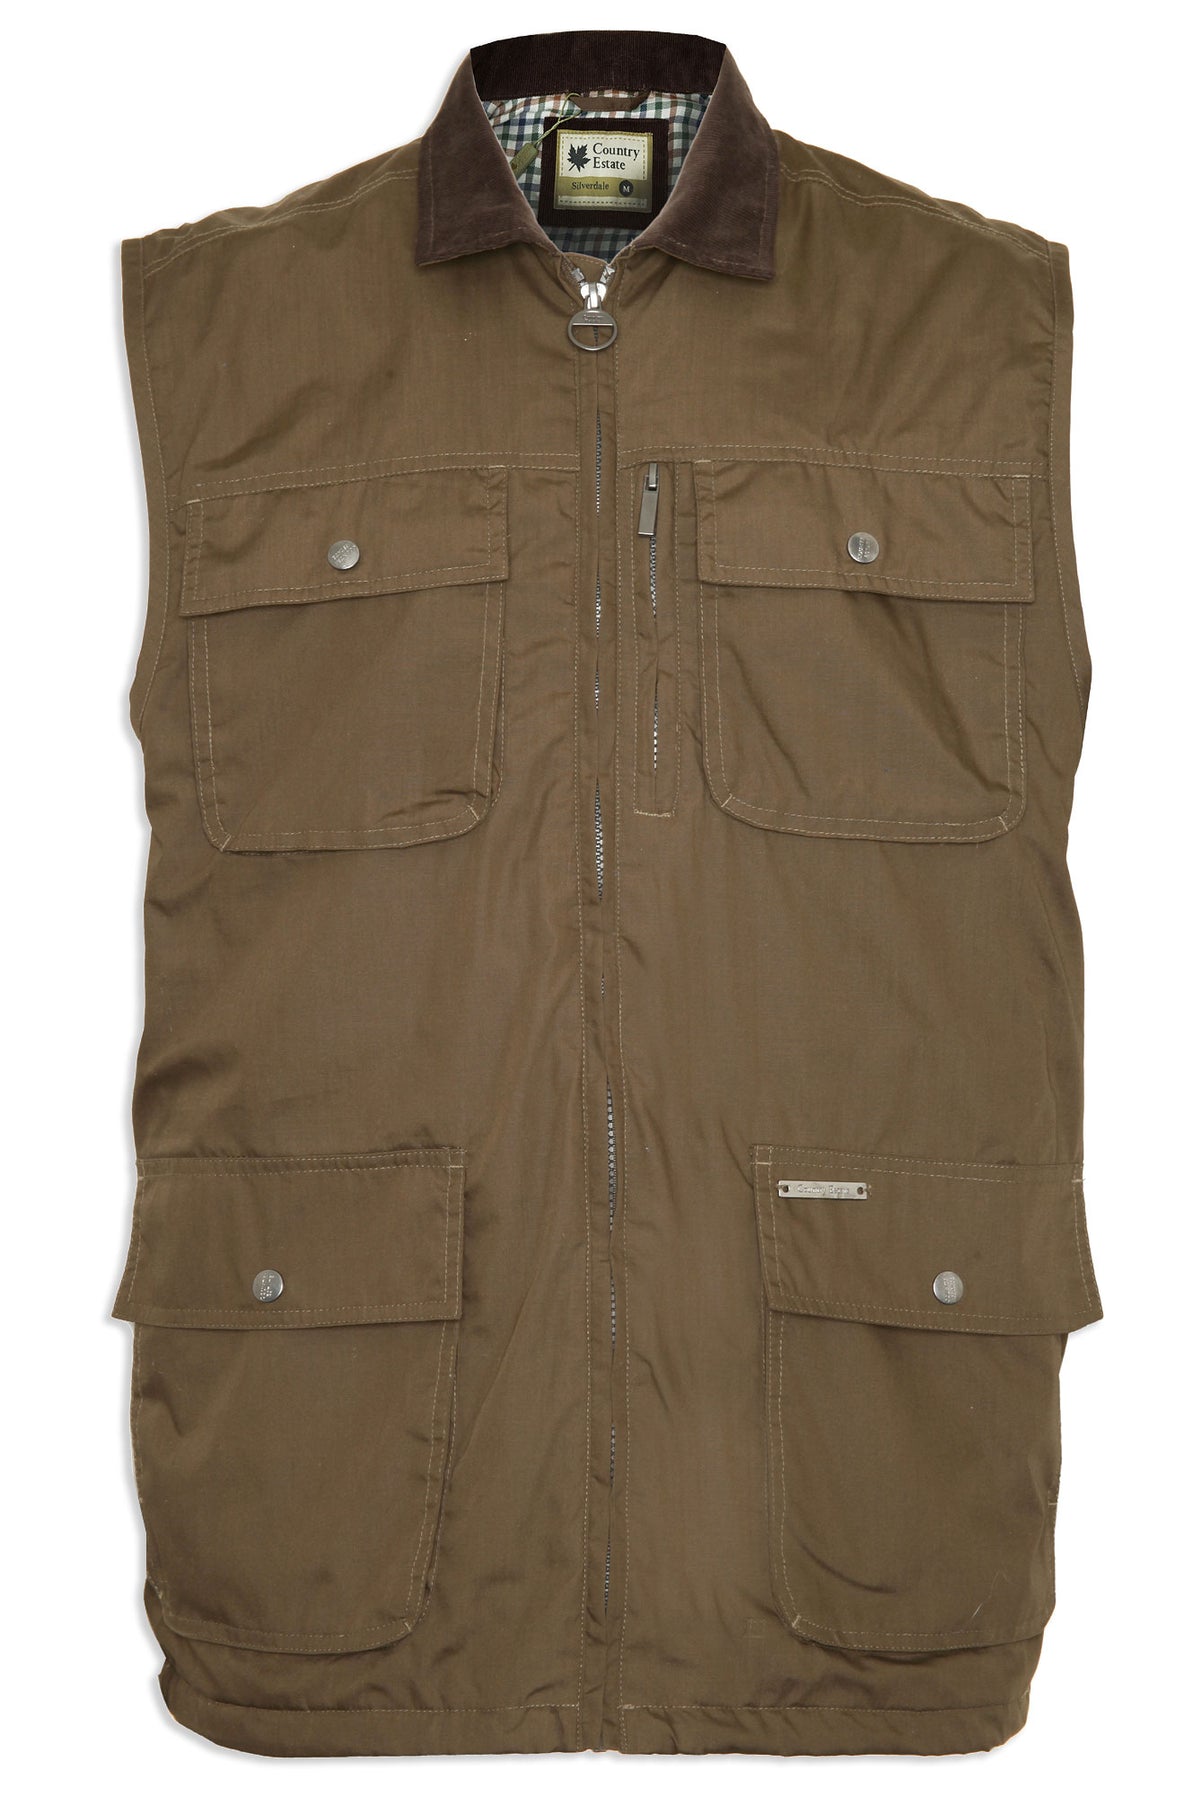 waistcoat with four secure pockets Silverdale Multi Pocket Waistcoat from Champion Outdoor